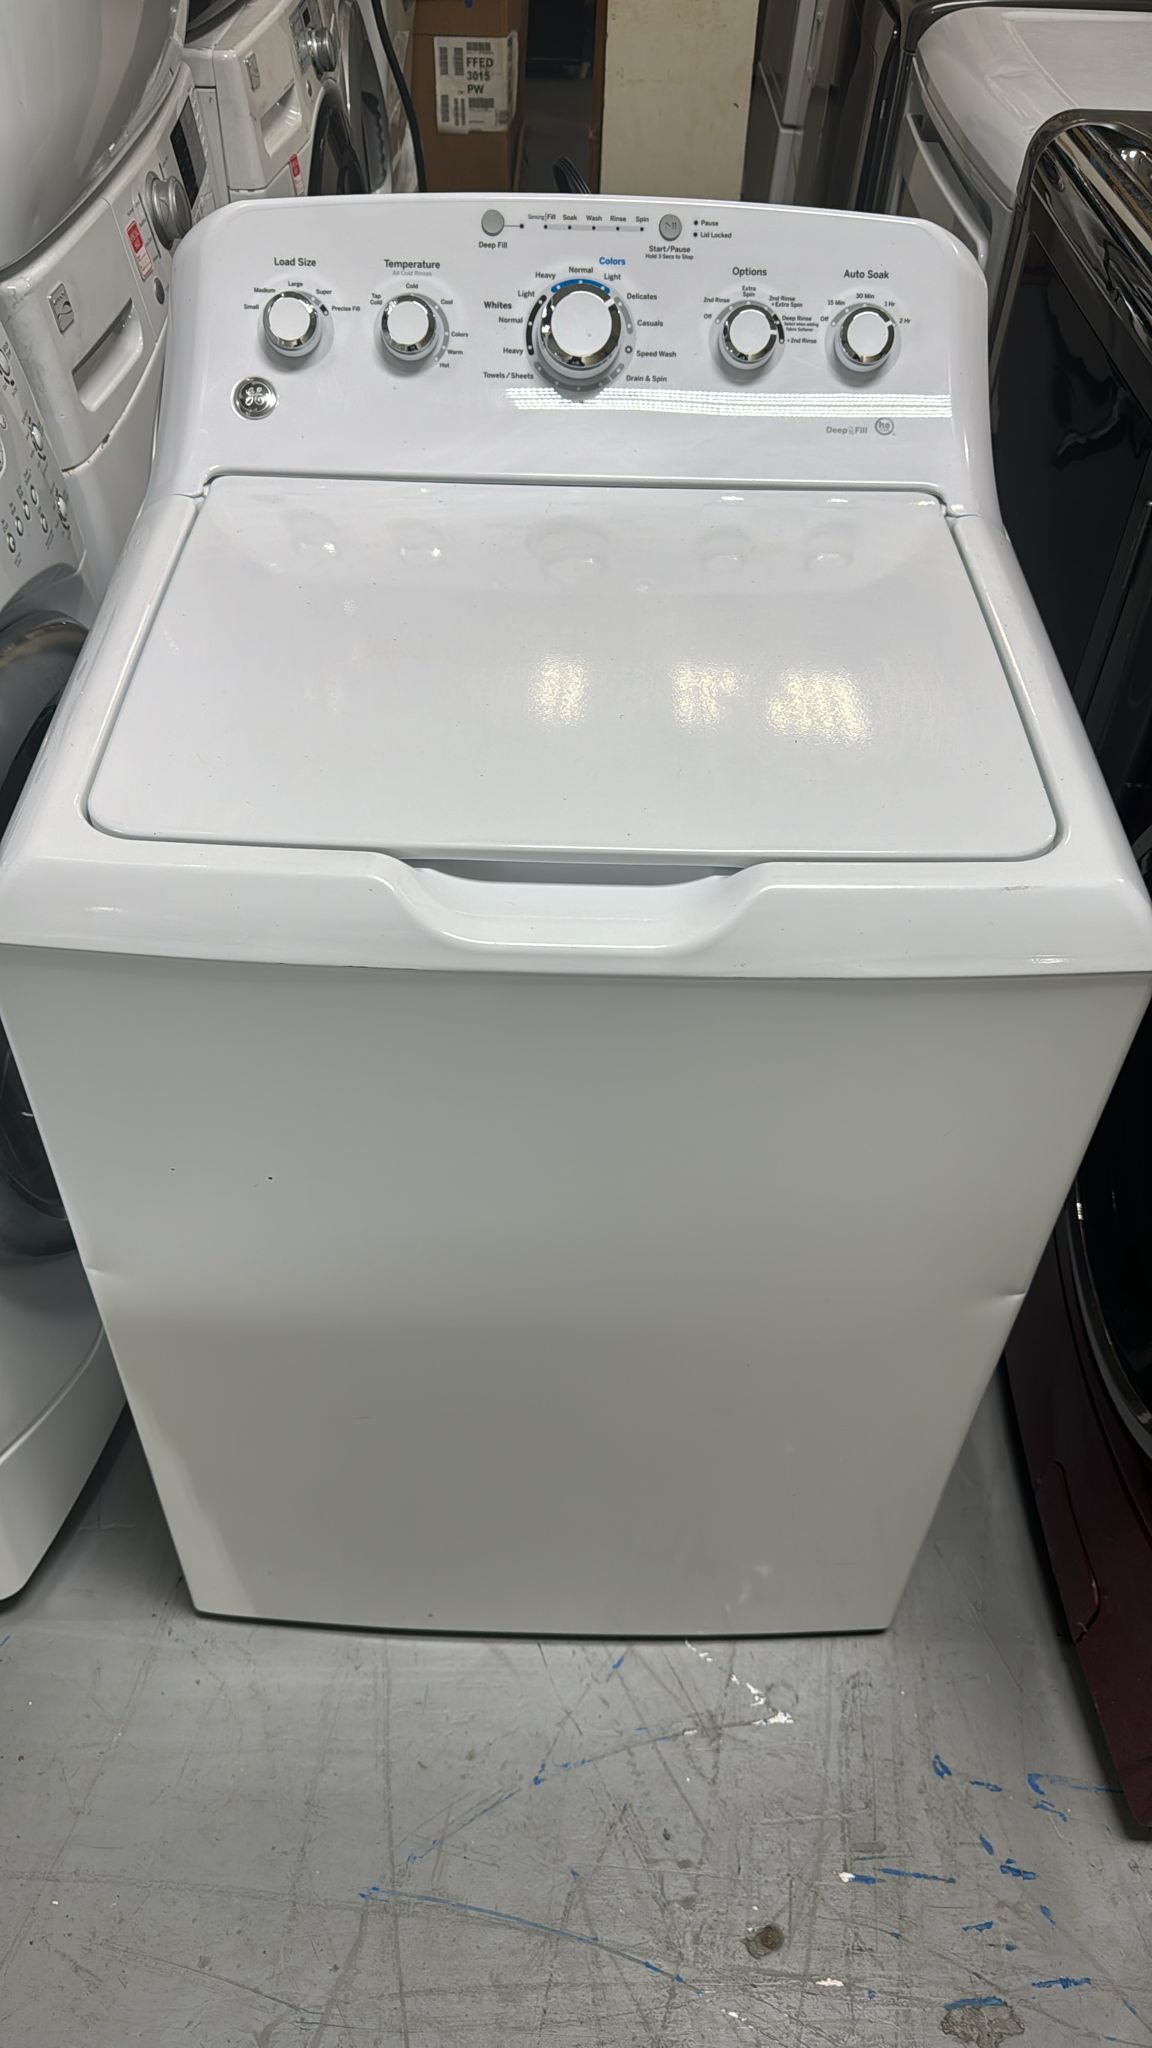 GE Washer Top Load ( Used ) – White